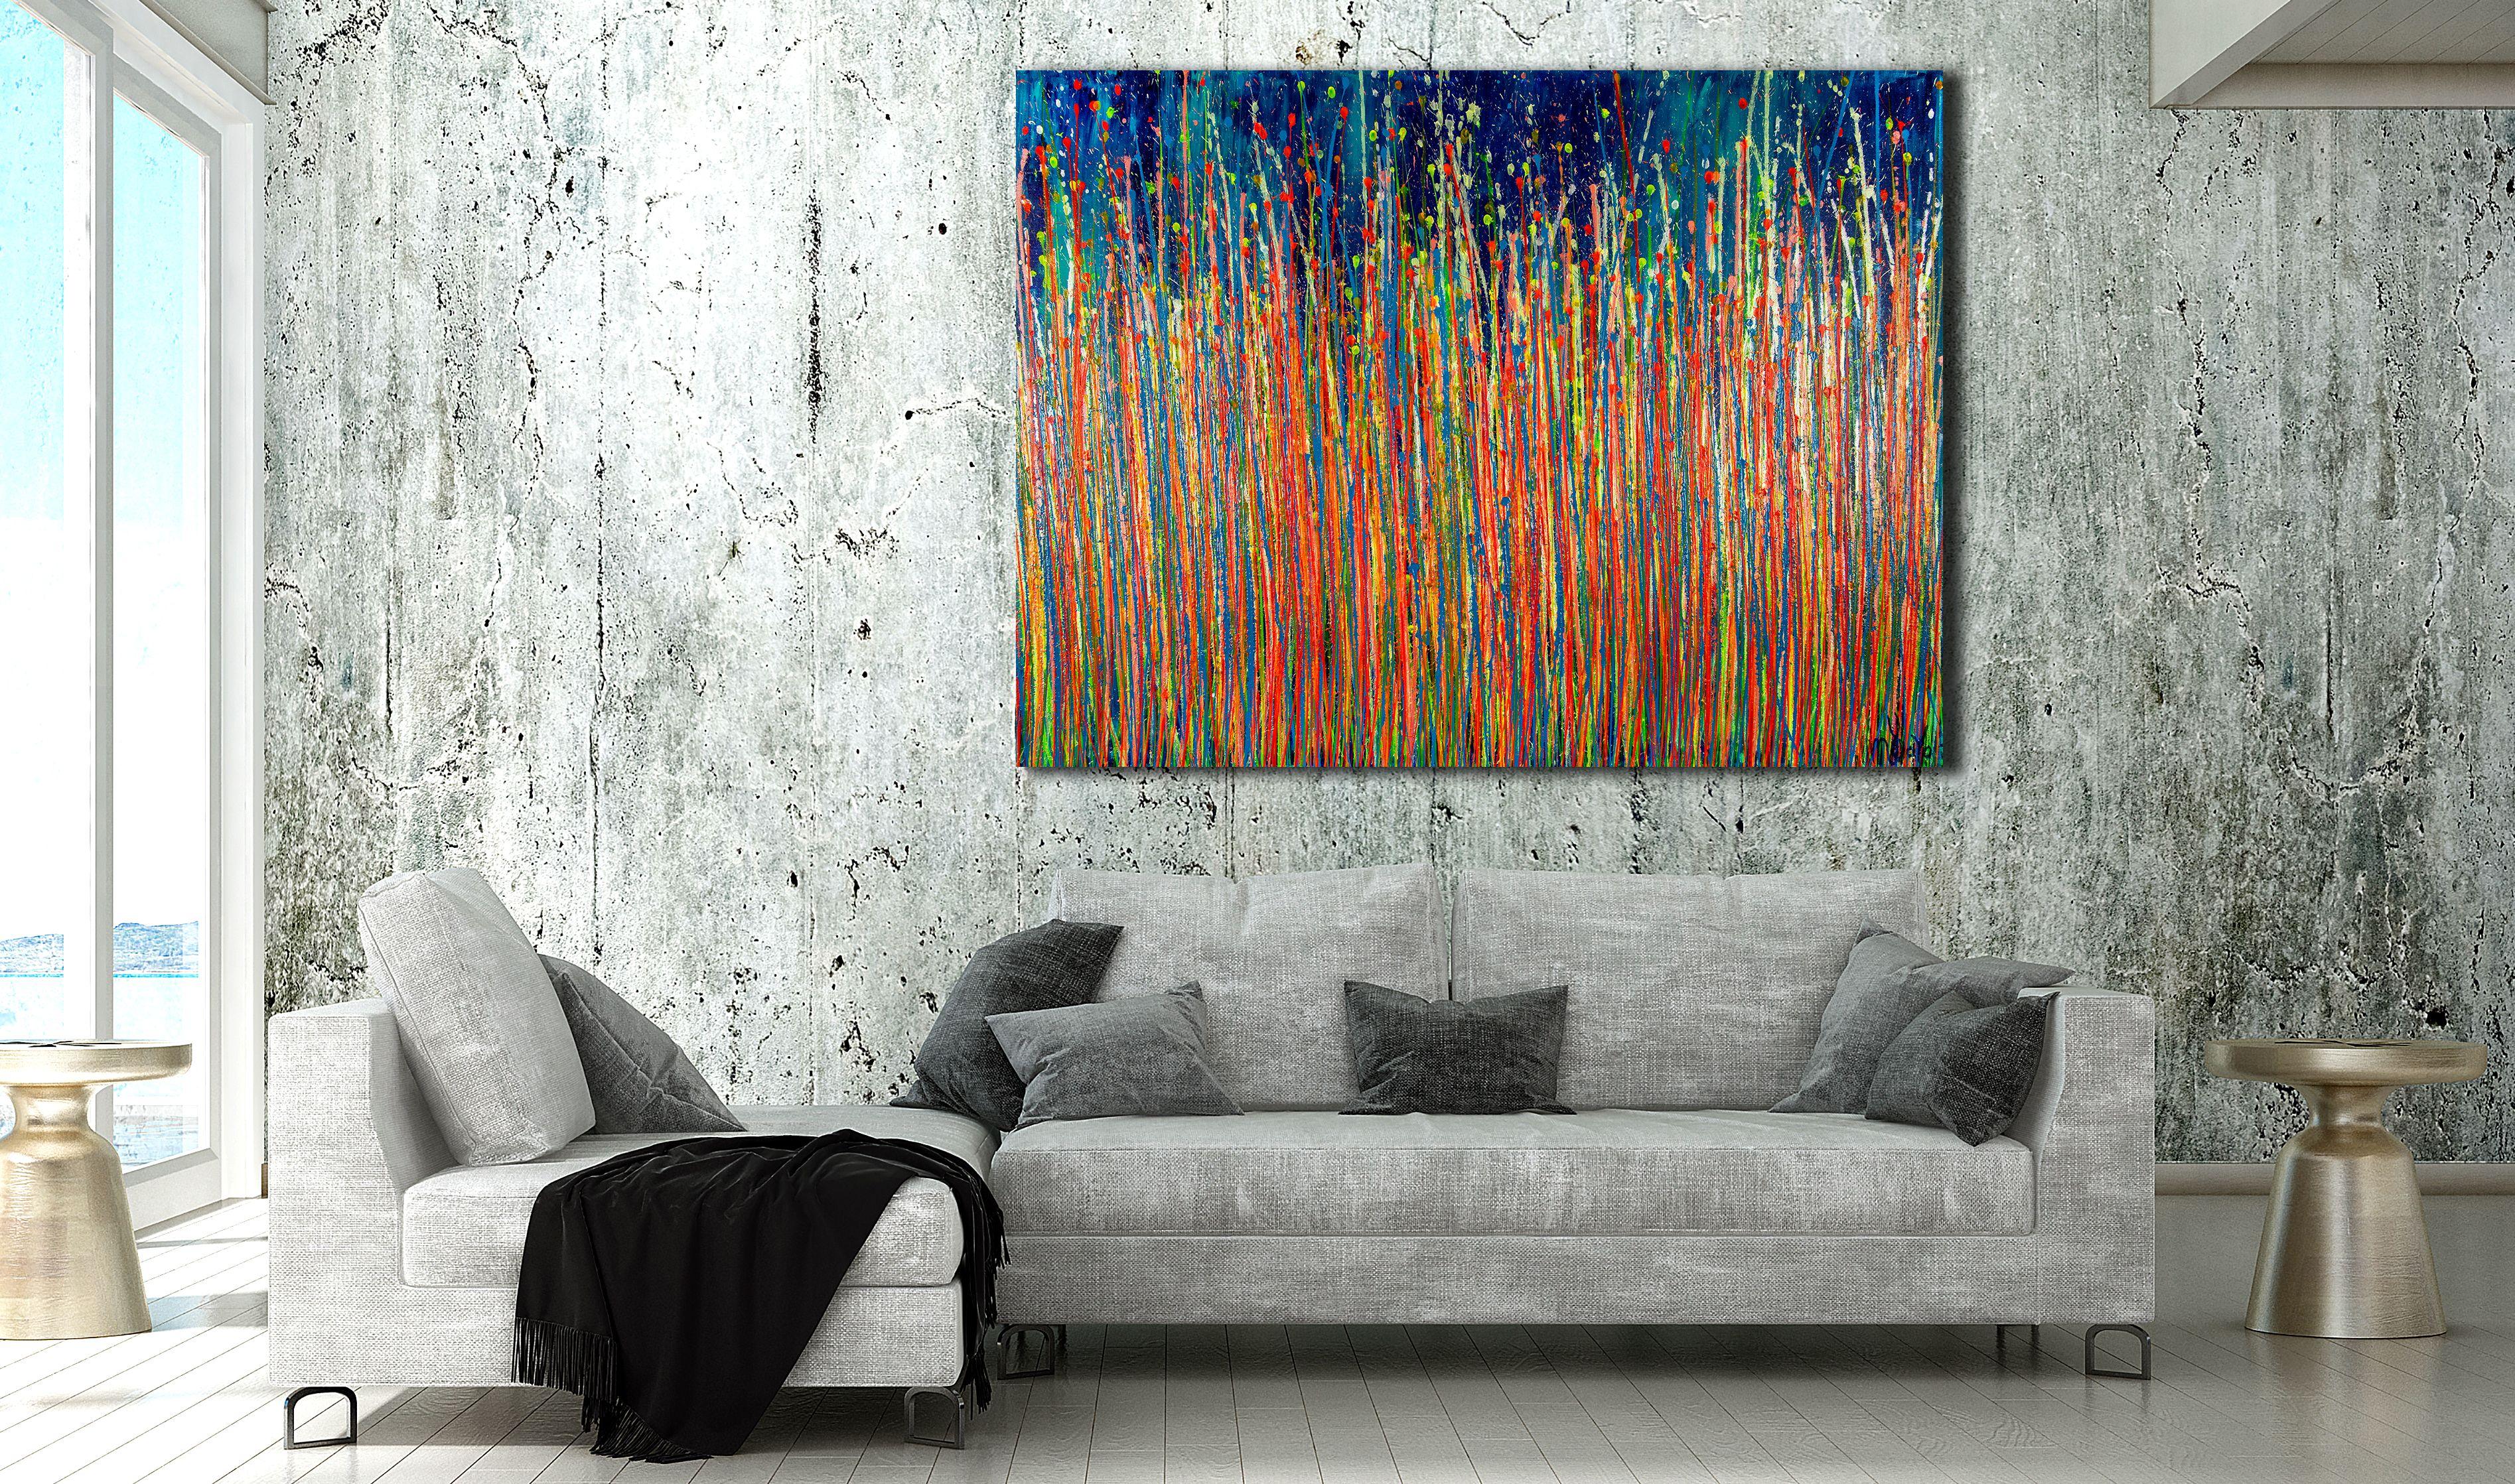 Painting: Acrylic on Canvas.    Expressive modern abstract, bold full of life, gloss and shimmer! inspired by nature. Shades of orange, yellow, green and turquoise with mica over a teal and blue background. signed in front with blue ink.    I